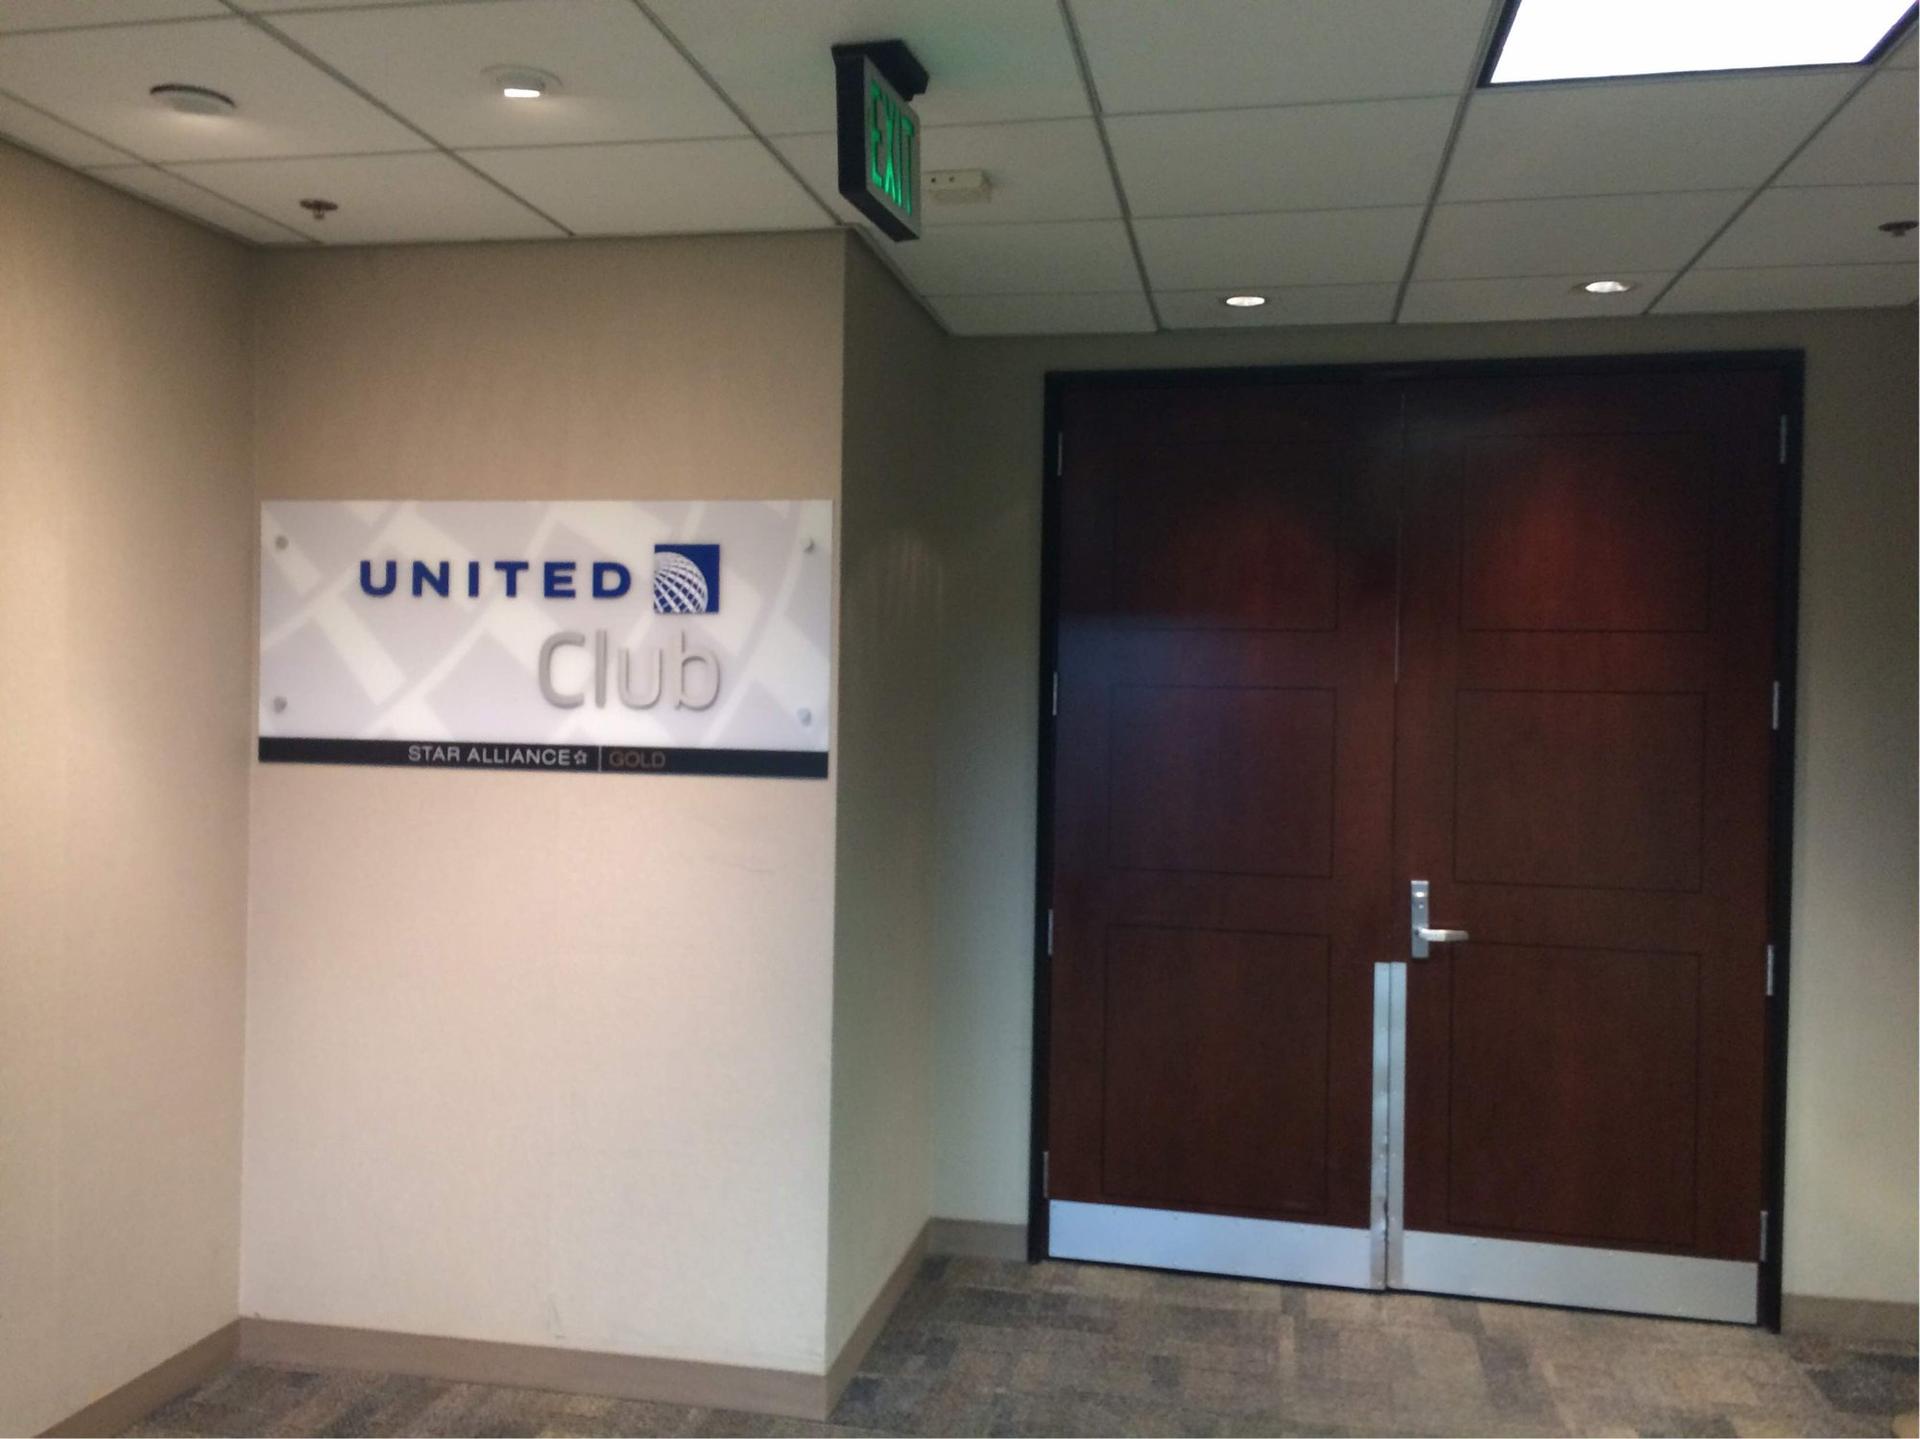 United Airlines United Club image 3 of 8